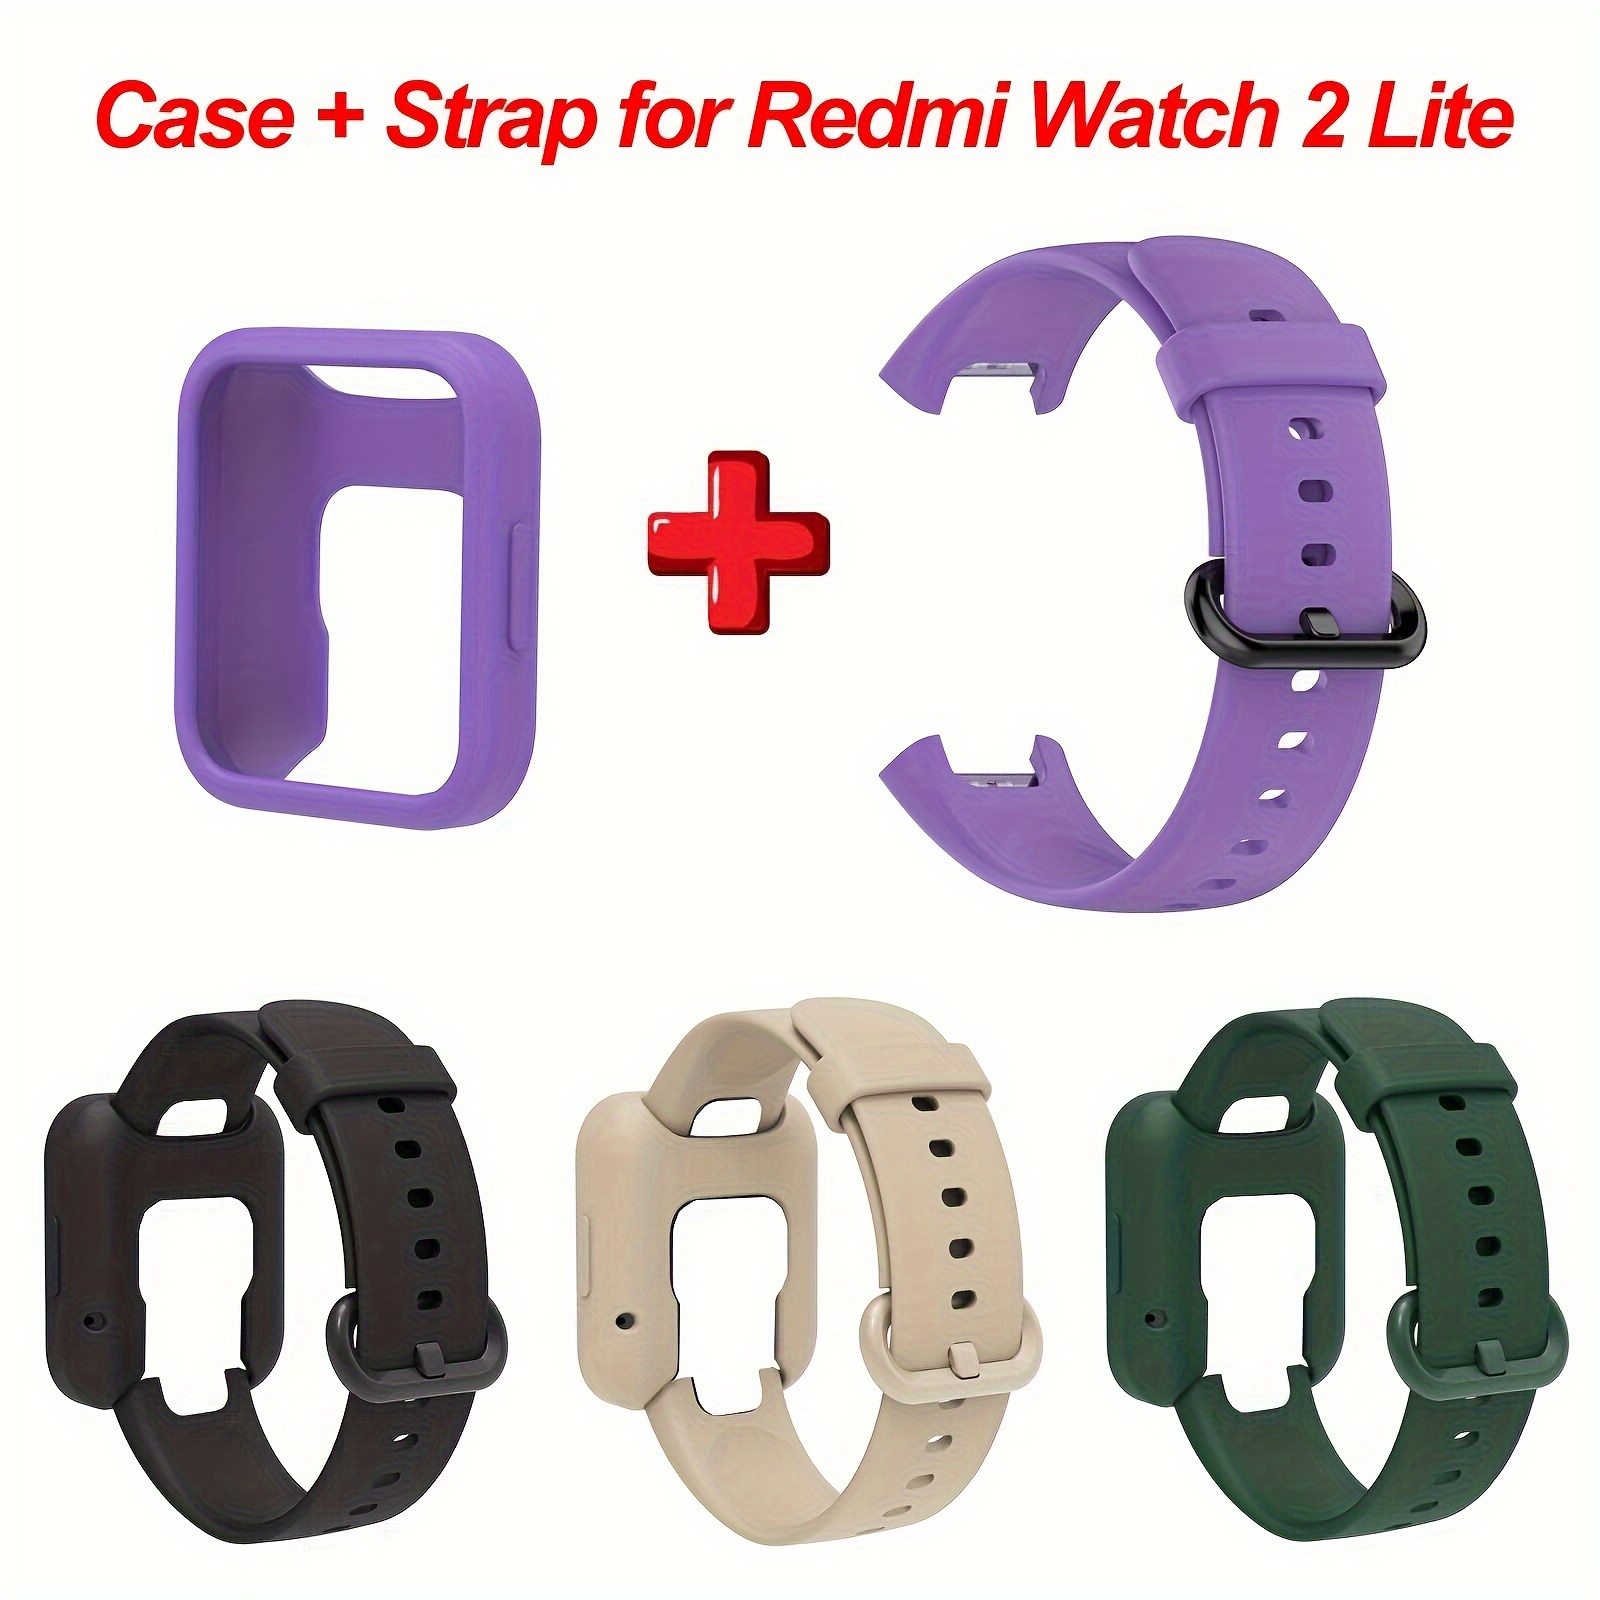 

Xiaomi Redmi Watch 2 Lite & 2 Smartwatch Band - Soft Silicone Strap With Protective Case Cover, Non-waterproof, Tang Buckle Closure, Battery-free - Compatible With Redmi Watch 2 Lite/redmi Watch 2